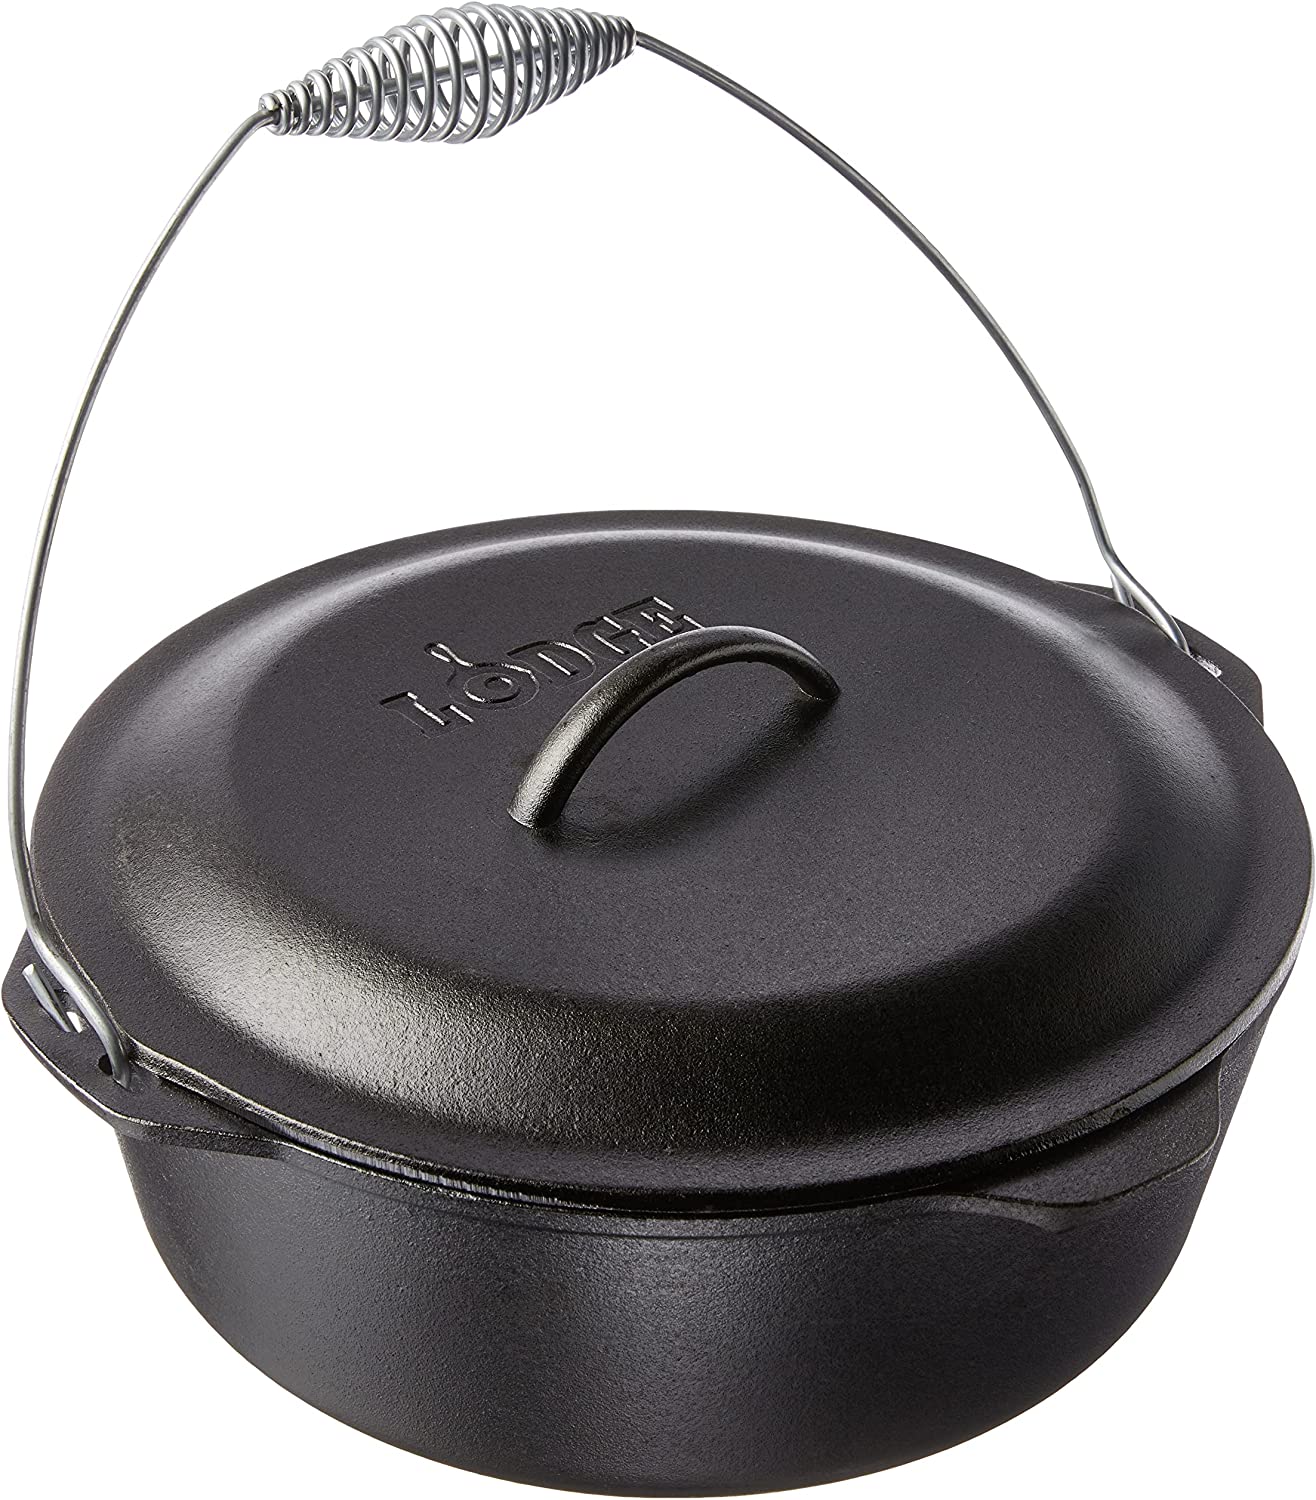 Lodge 9 quart dutch oven for camping